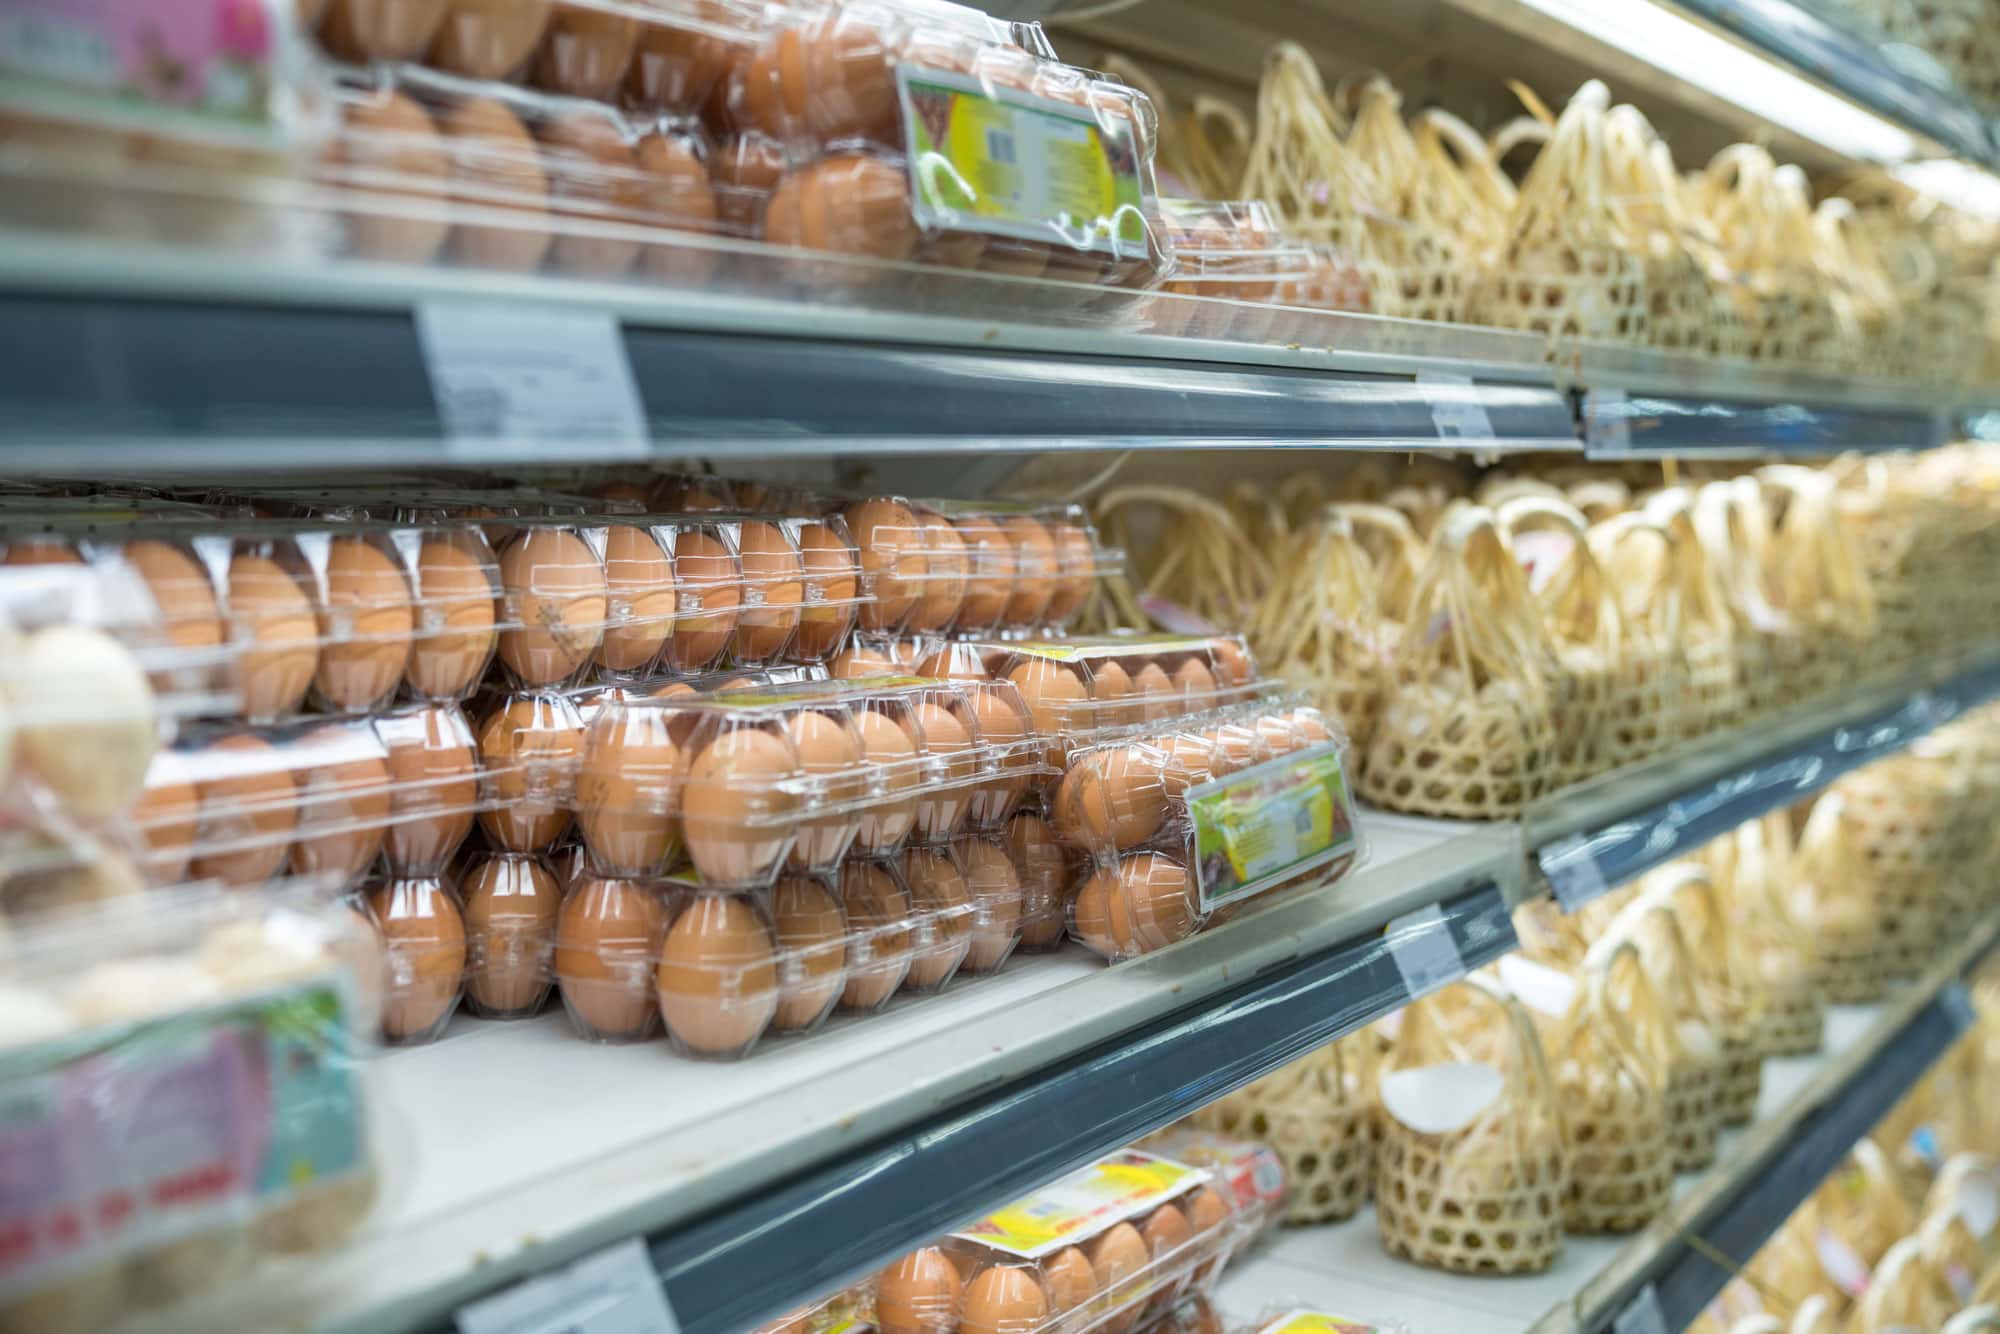 eggs in plastic cartons in refrigerated shelves in grocery store